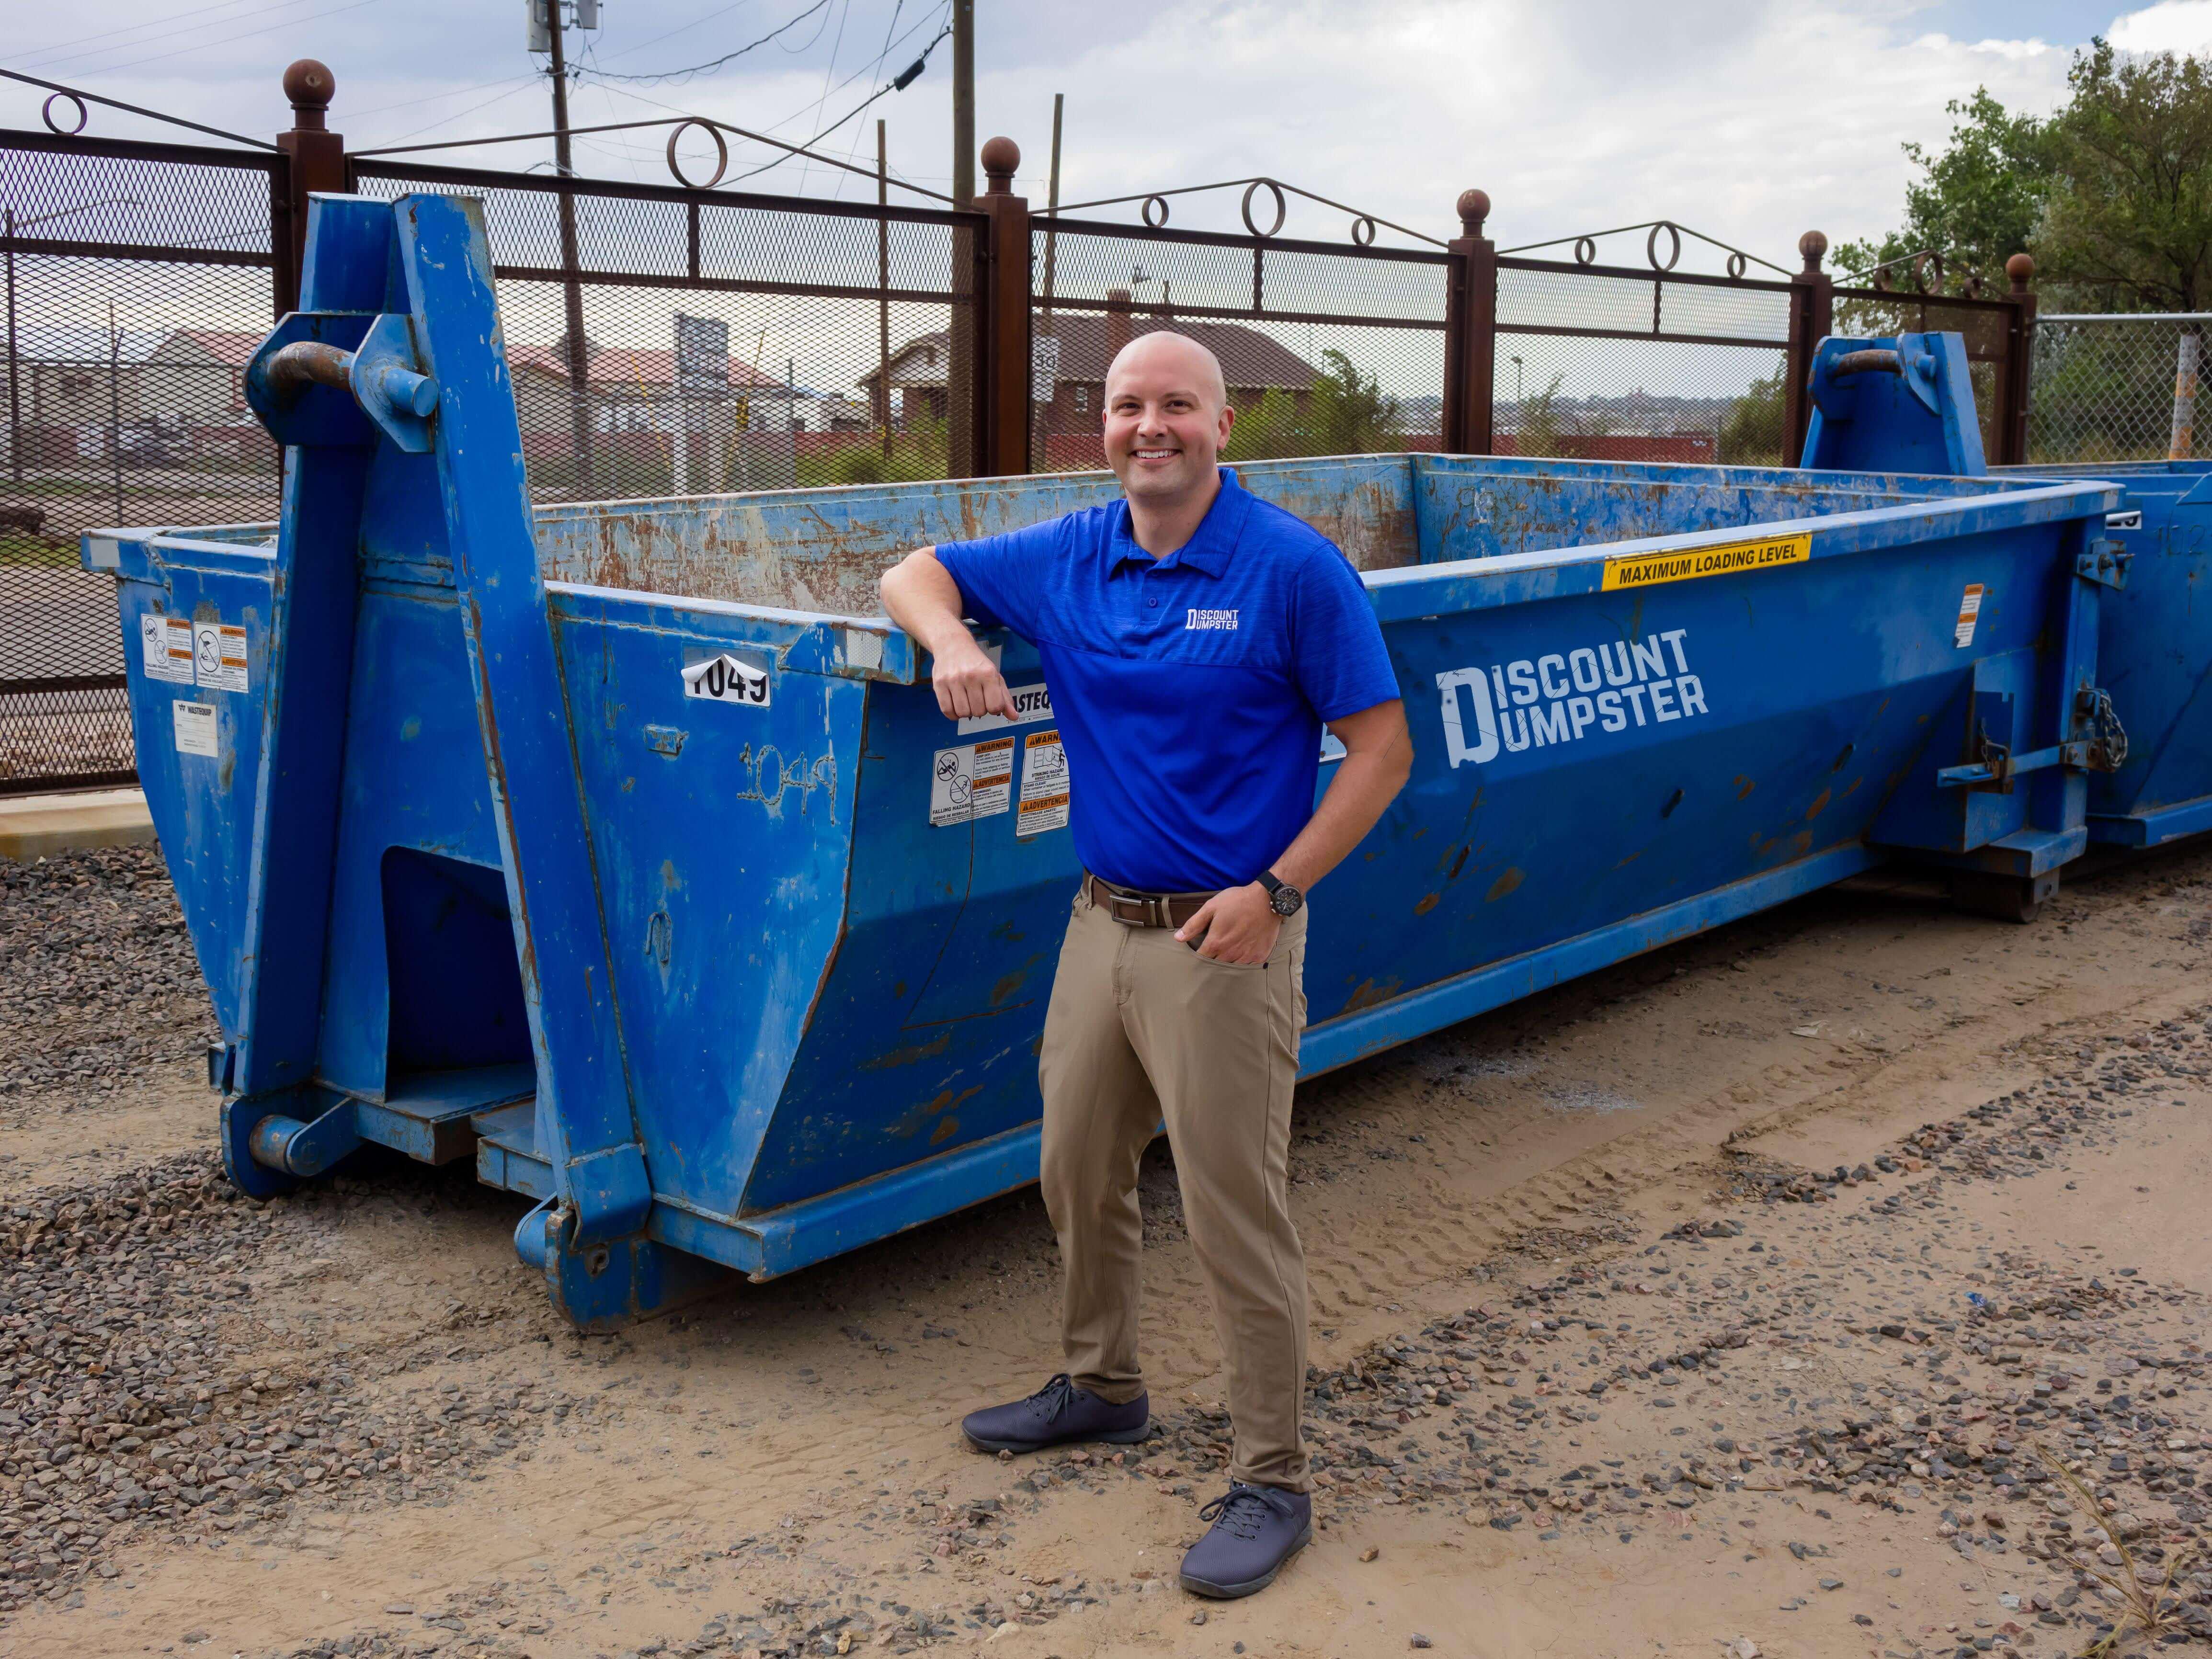 Discount dumpster is a quality dumpster rental service in chicago il